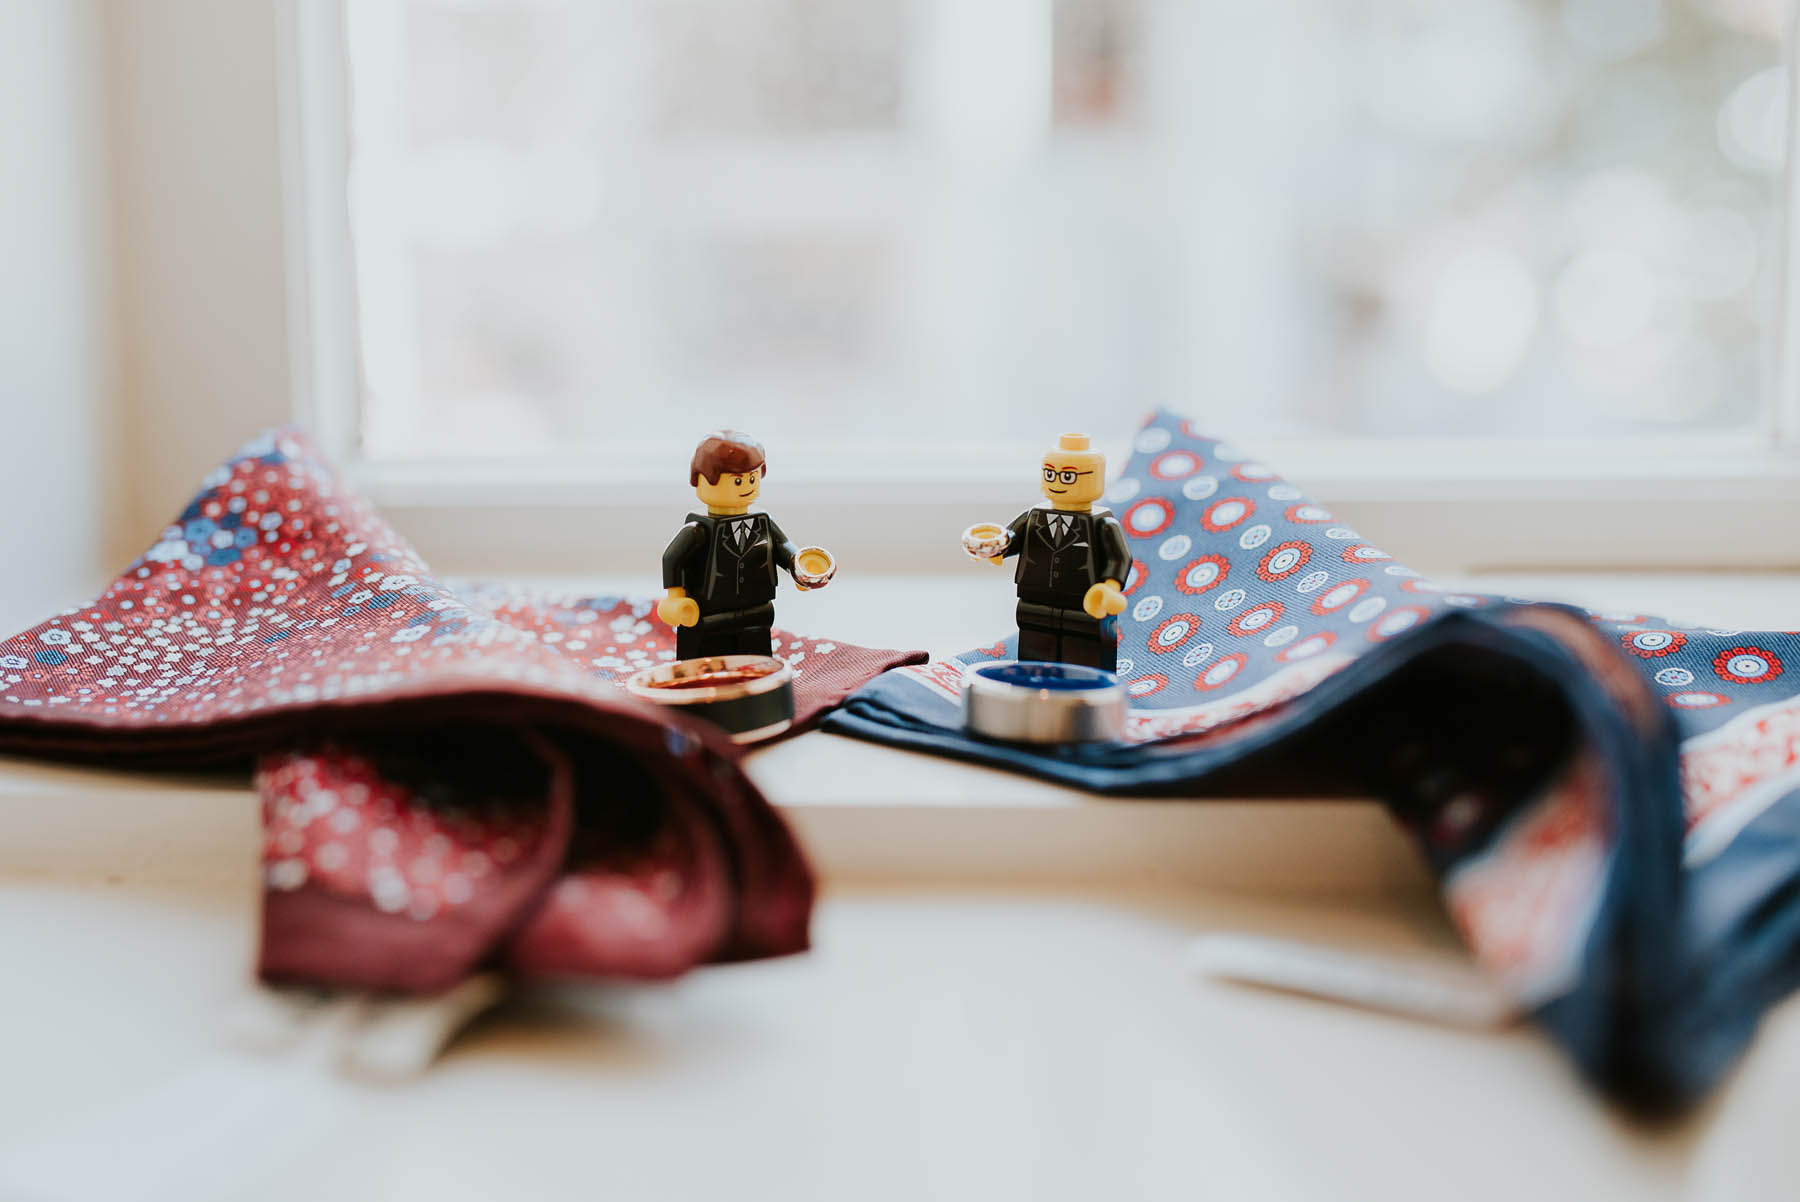 Two Lego figurines that look like the grooms, sitting on burgundy and navy pocket squares.